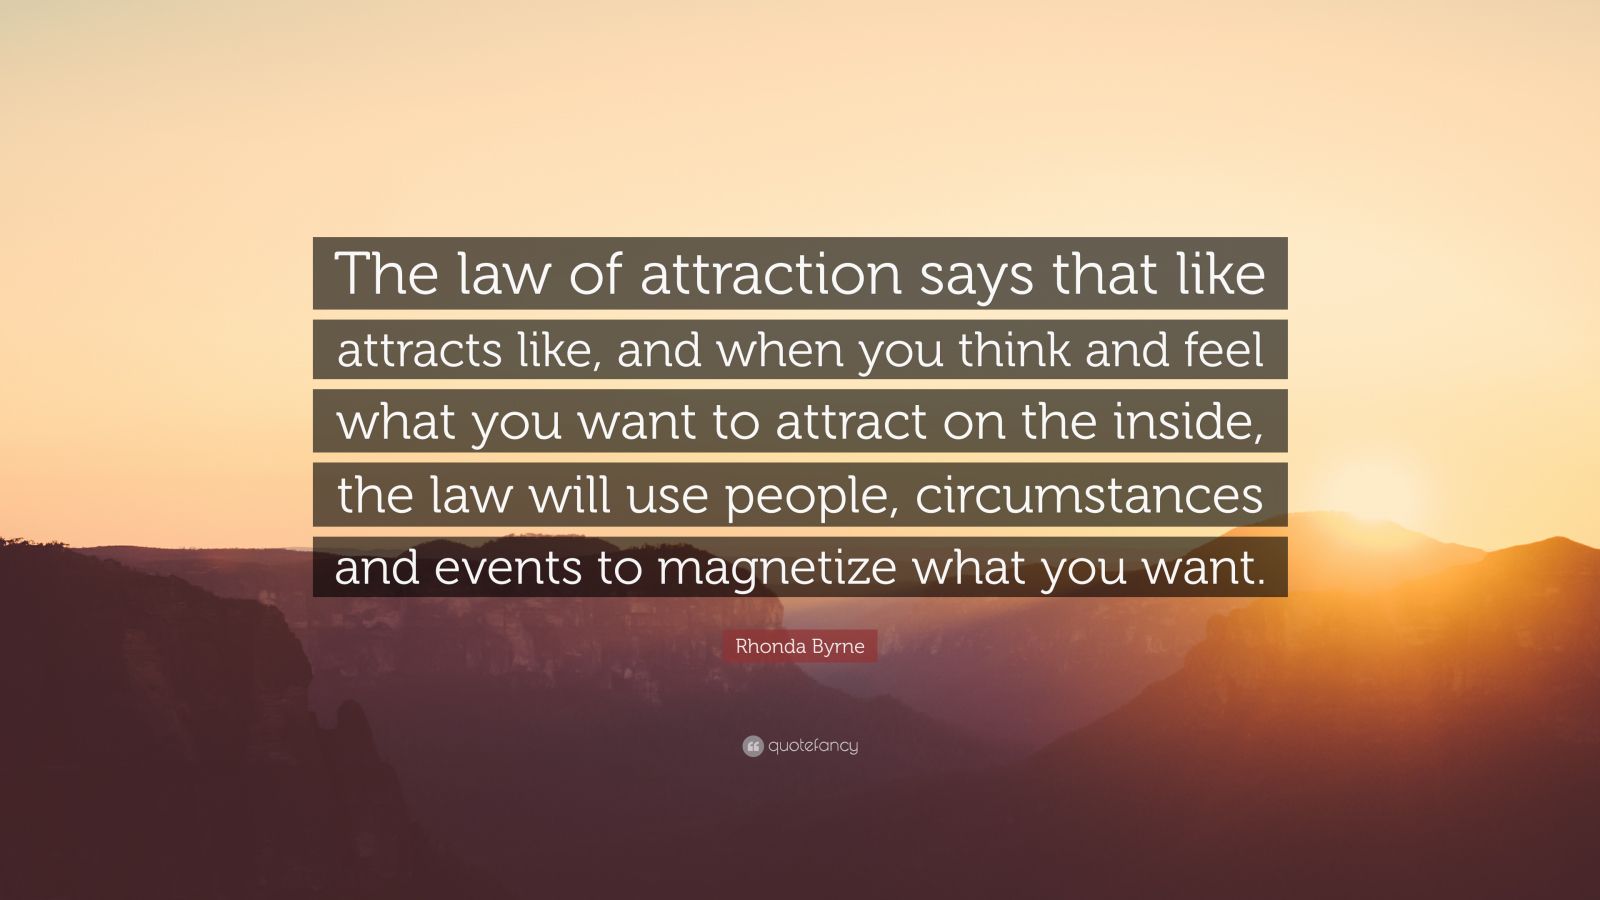 Rhonda Byrne Quote: “The law of attraction says that like attracts like ...